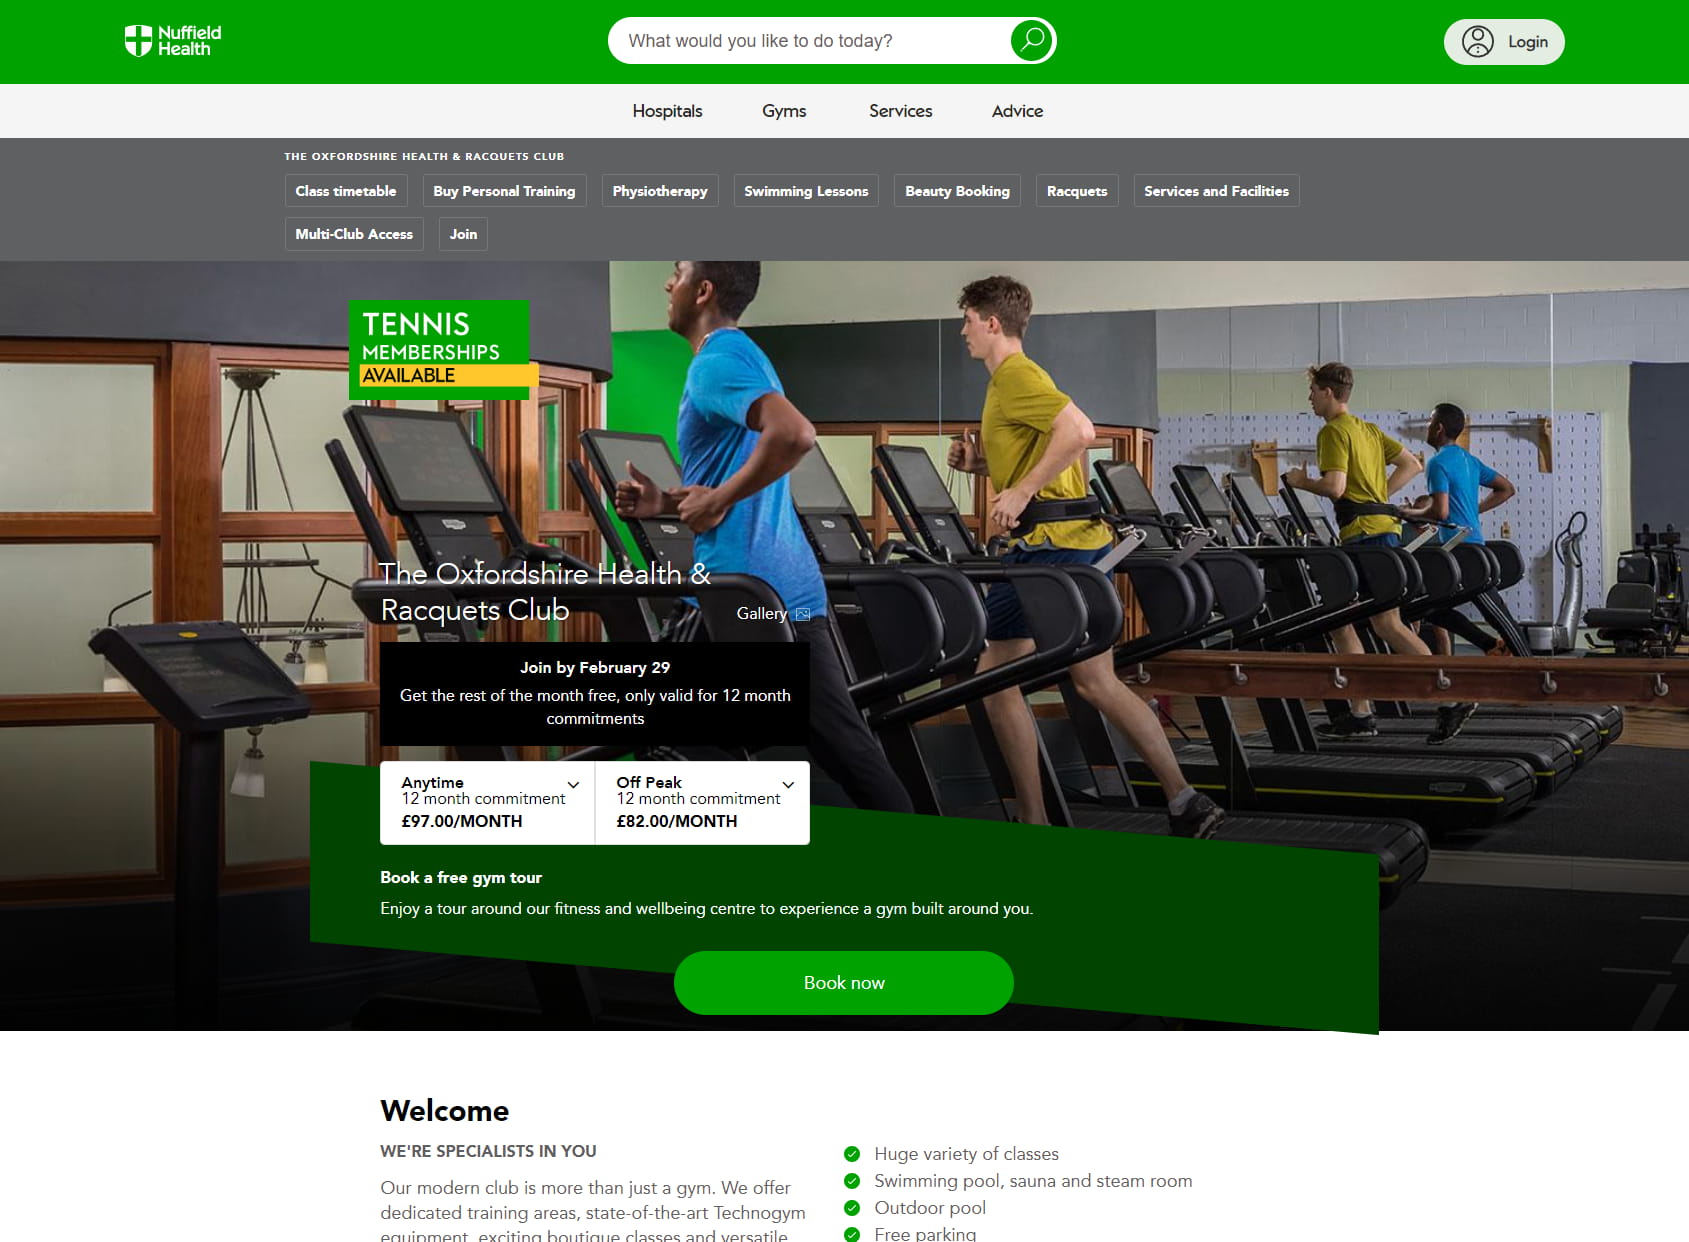 Nuffield Health The Oxfordshire Health & Racquets Club